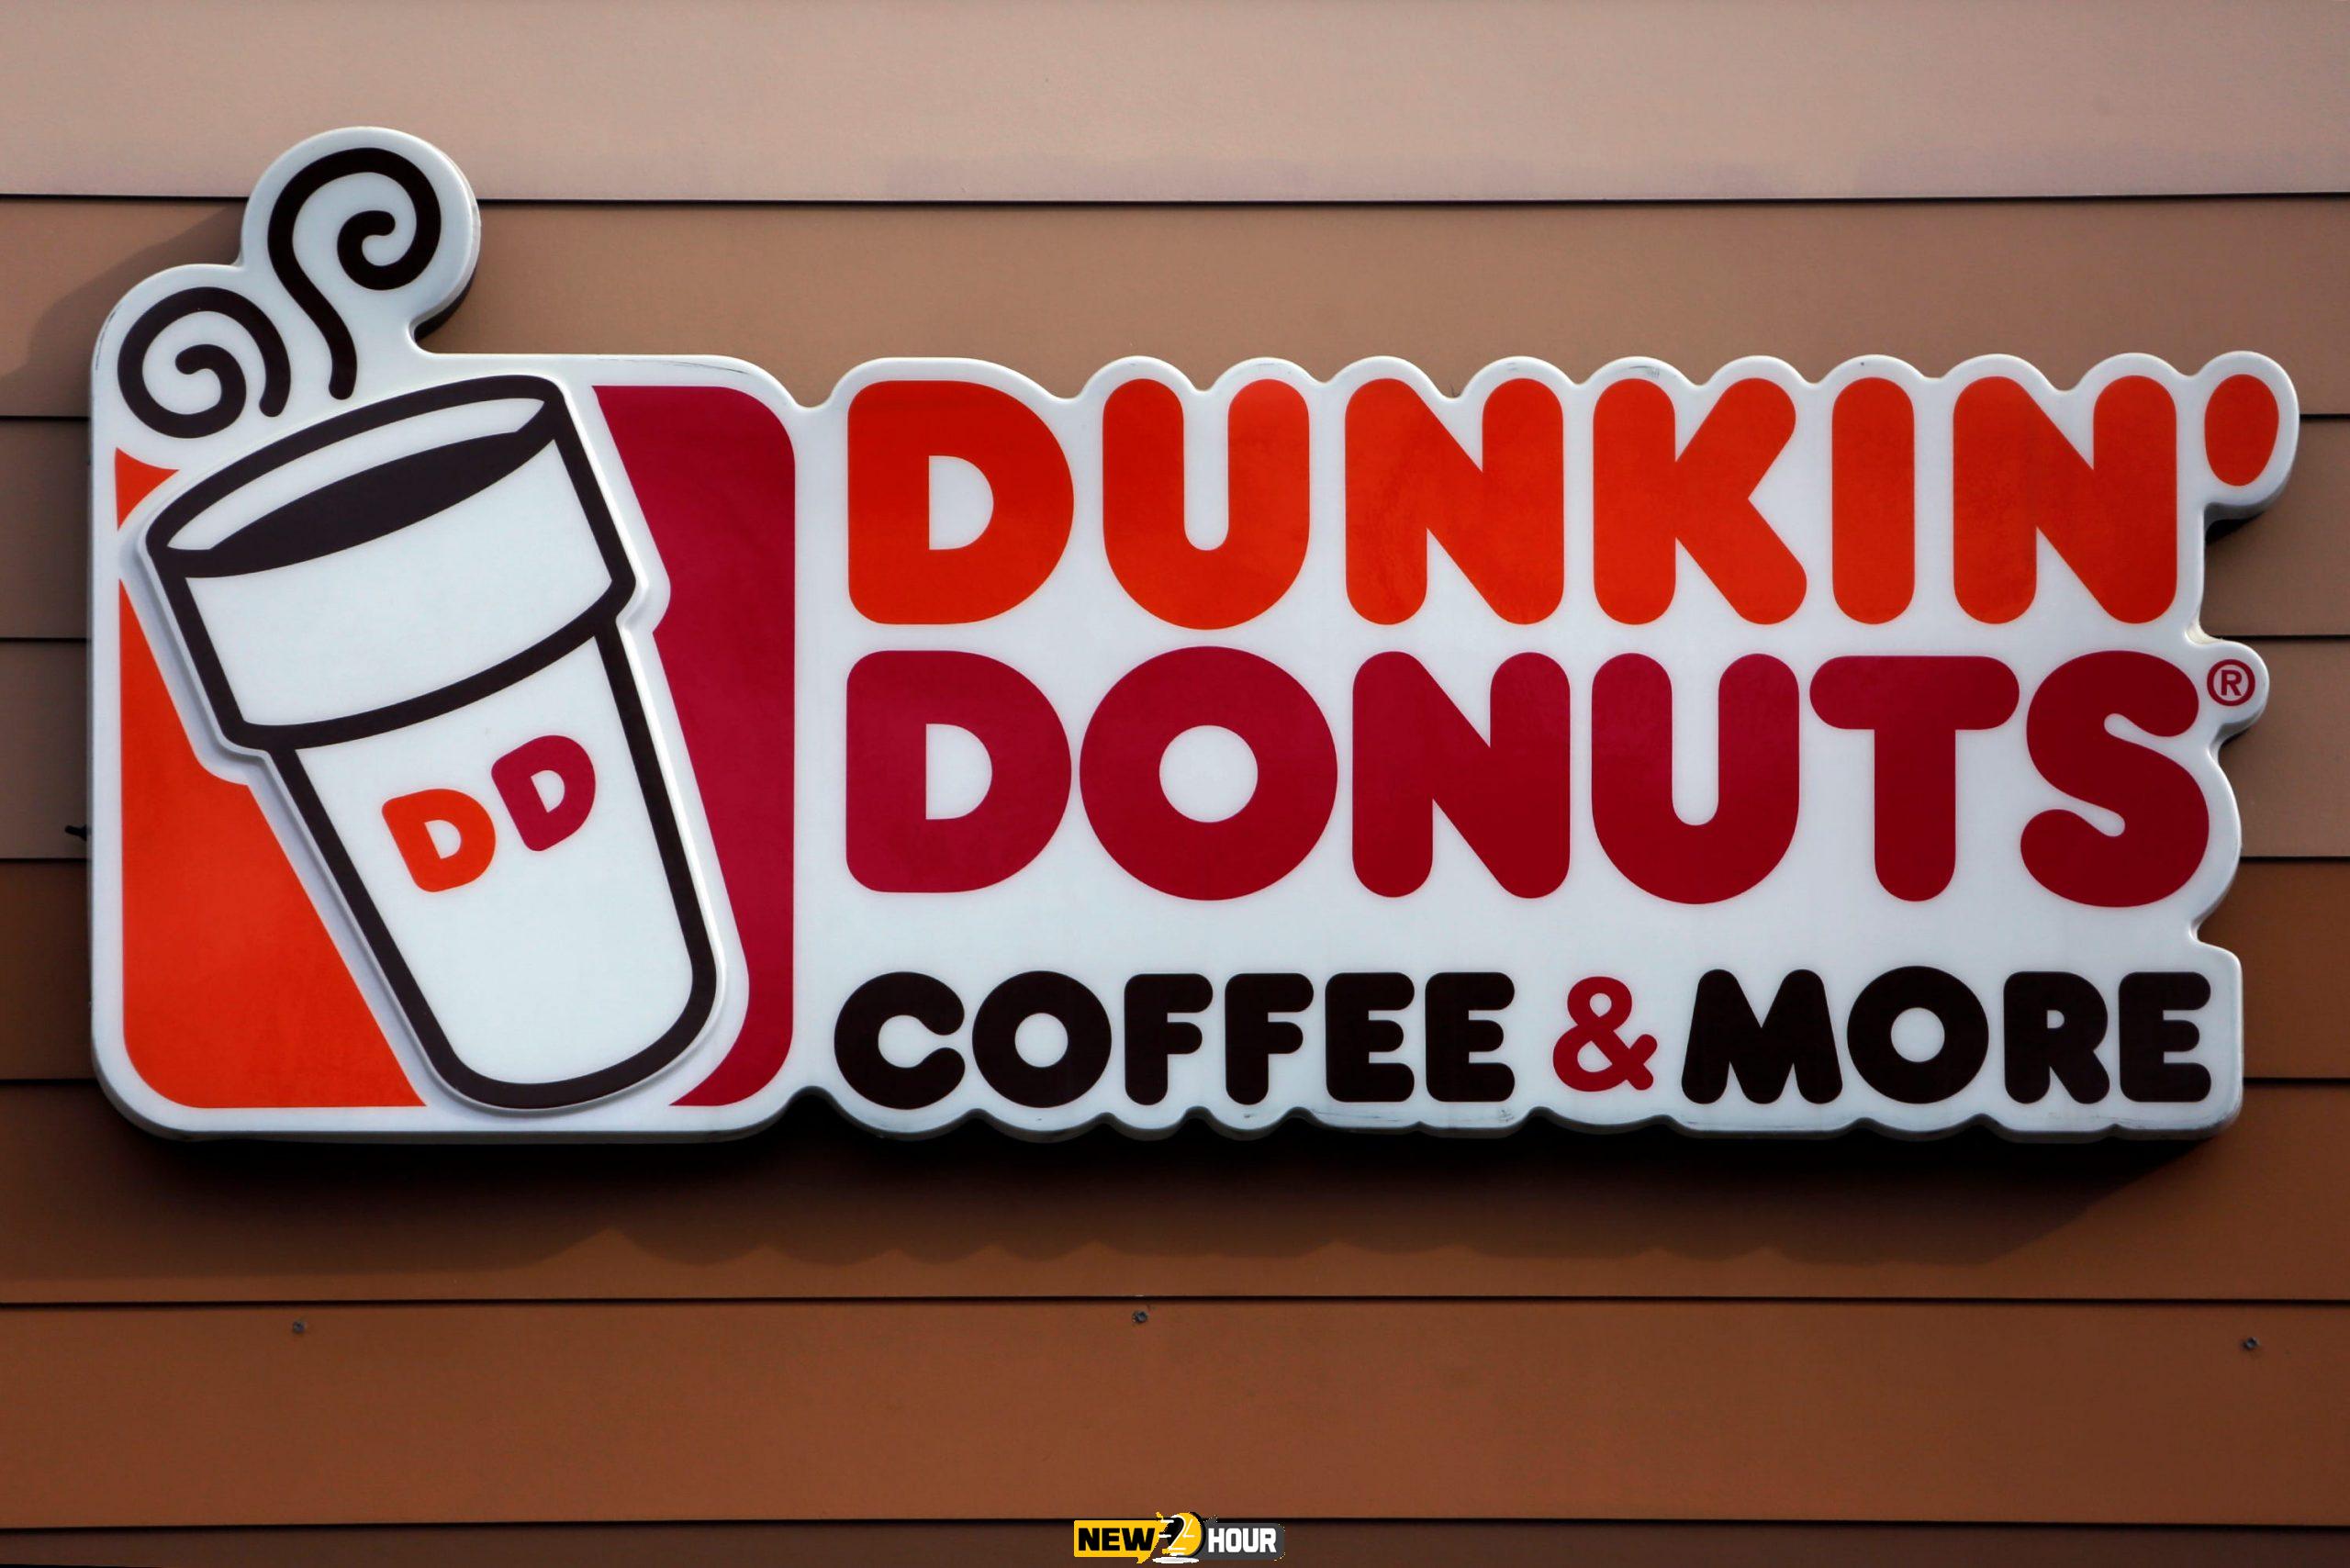 IS DUNKIN DONUTS, A FAST-FOOD NETWORK, OPEN ON THANKSGIVING 2021?